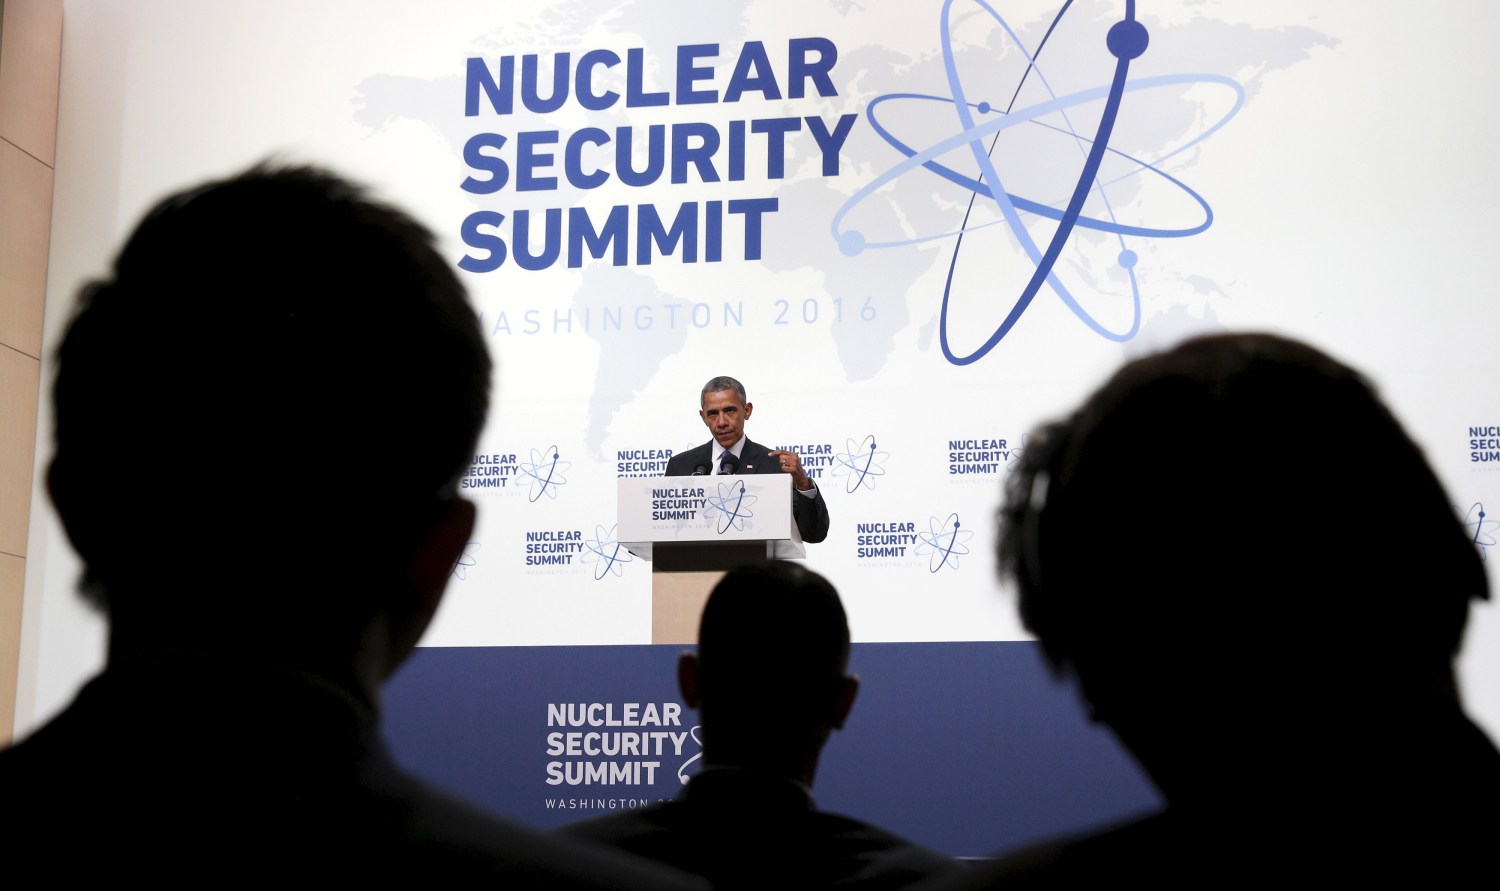 U.S. President Barack Obama speaks during a press conference at the conclusion of the Nuclear Security Summit in Washington April 1, 2016. REUTERS/Kevin Lamarque - RTSD7QS